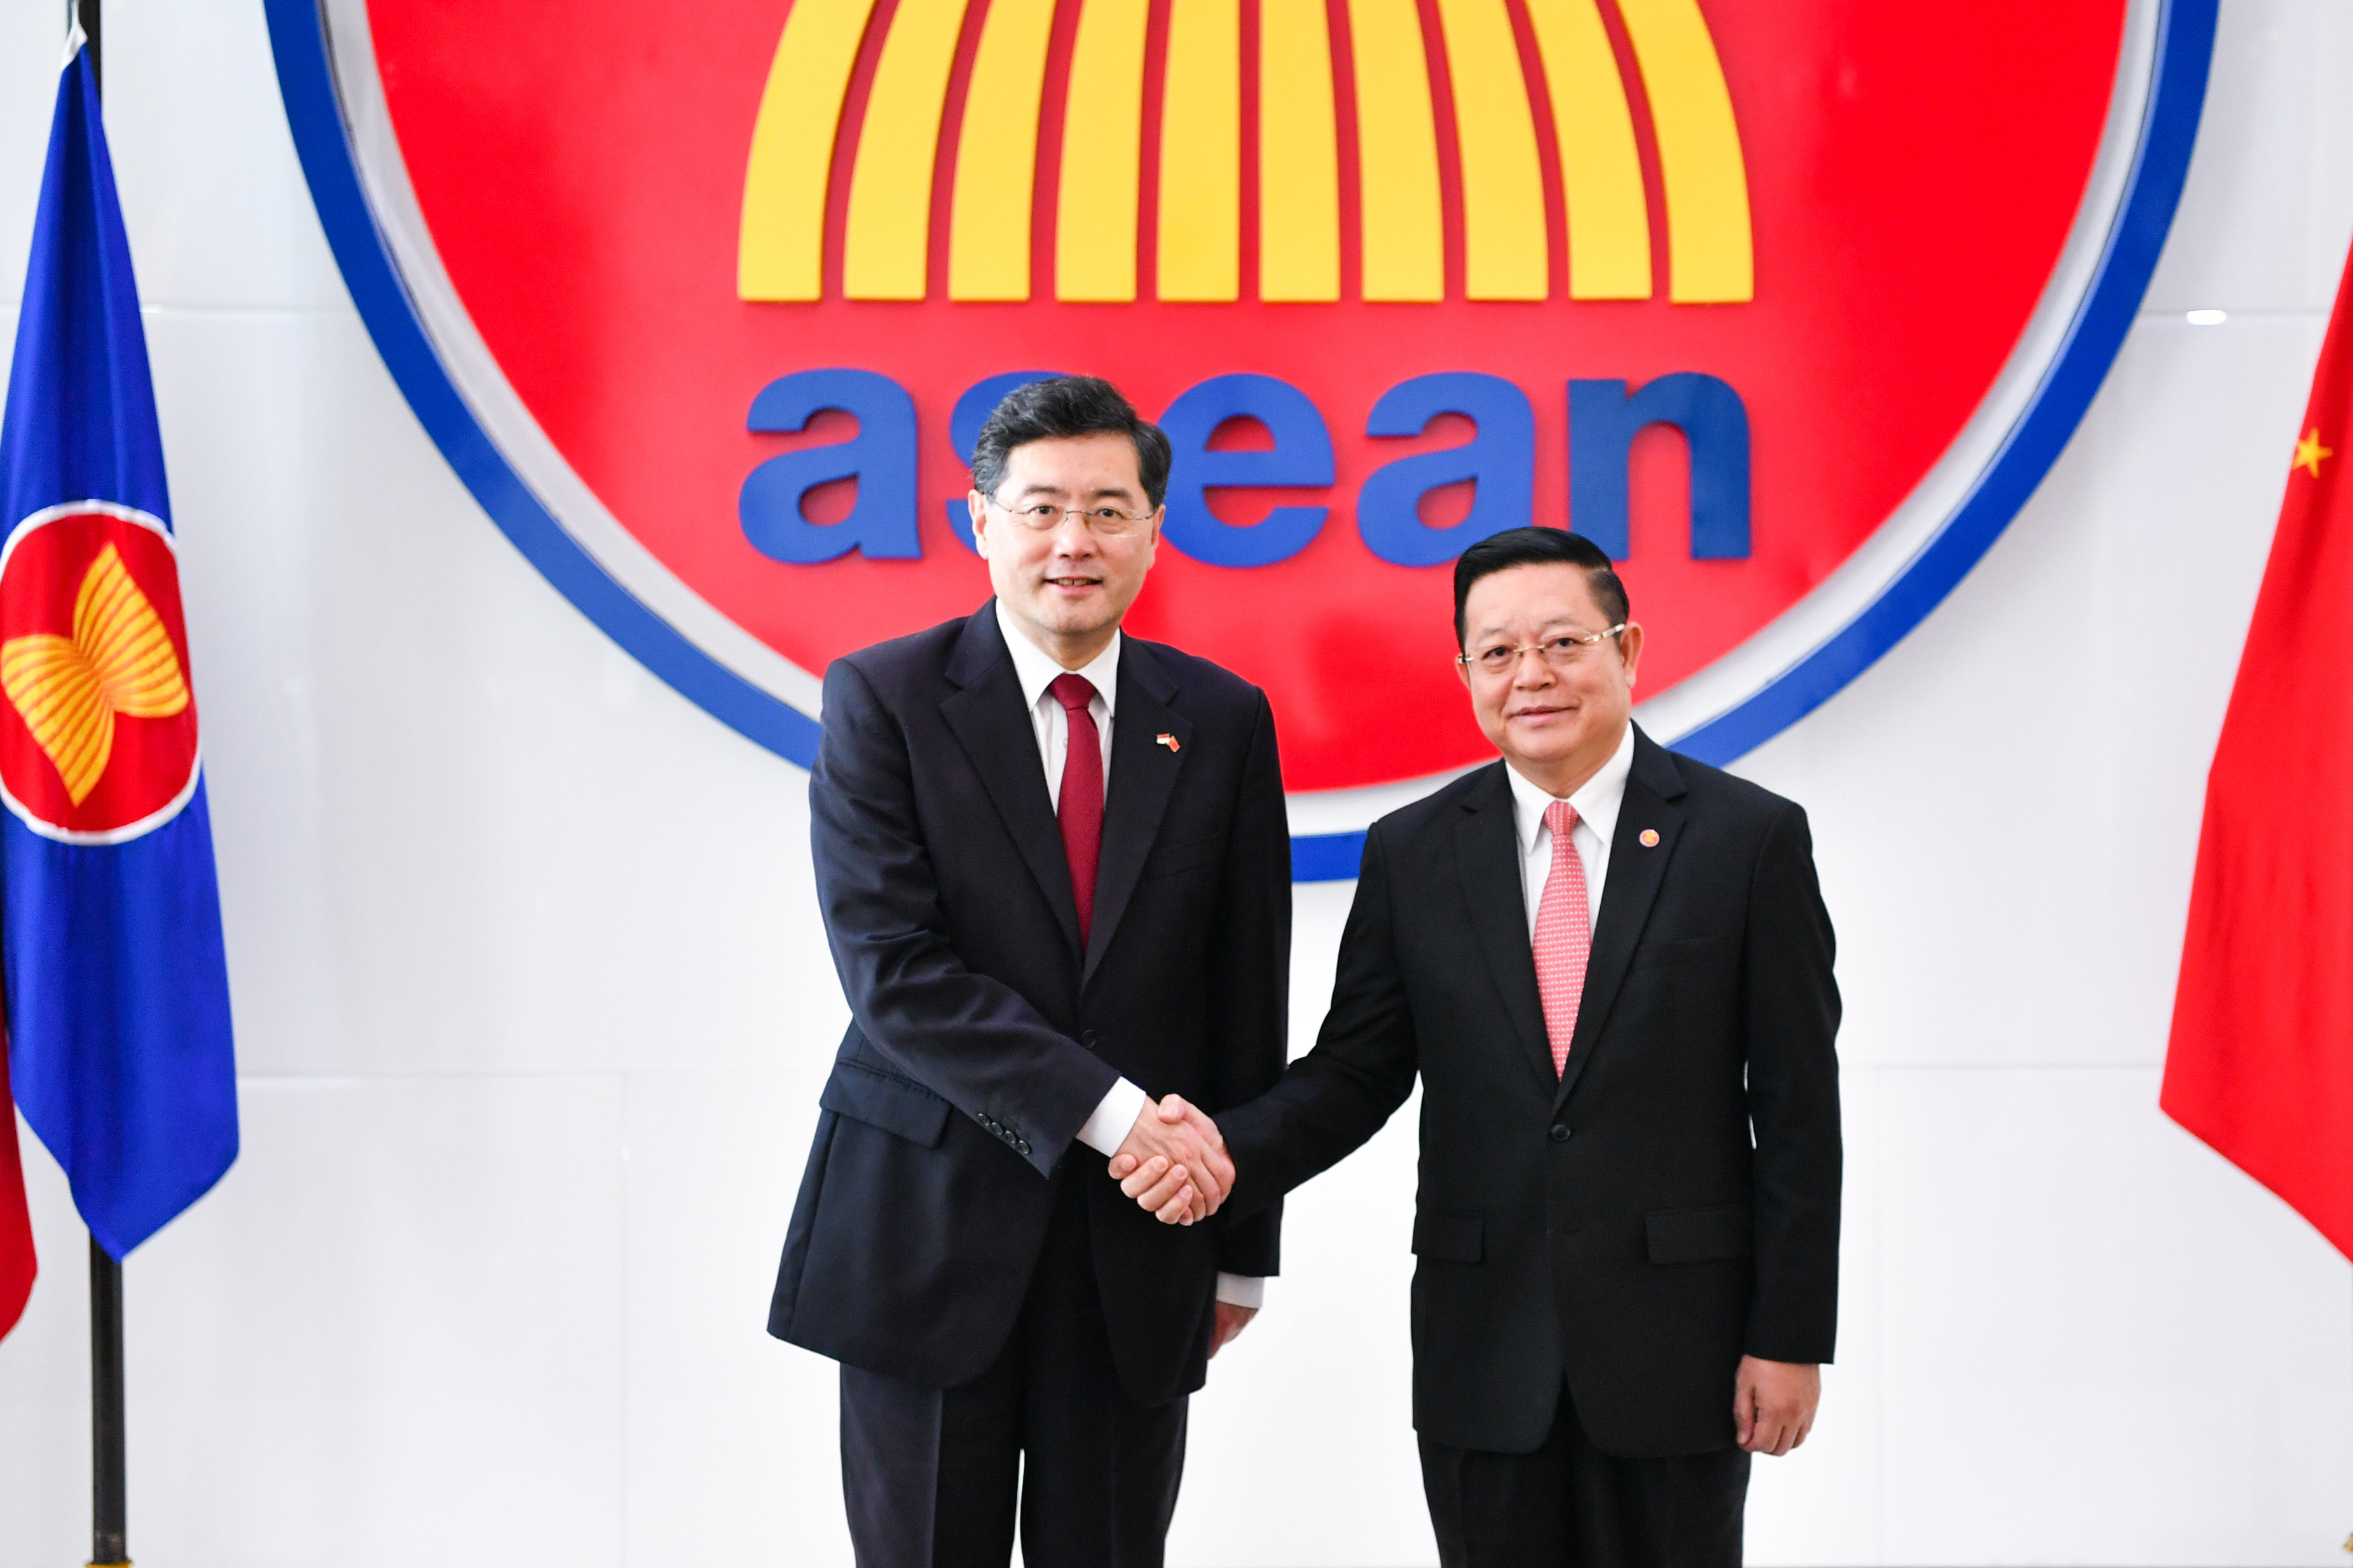 Chinese Foreign Minister Qin Gang (left) meets Kao Kim Hourn, Asean’s secretary general, in Jakarta on Wednesday. Photo: Xinhua